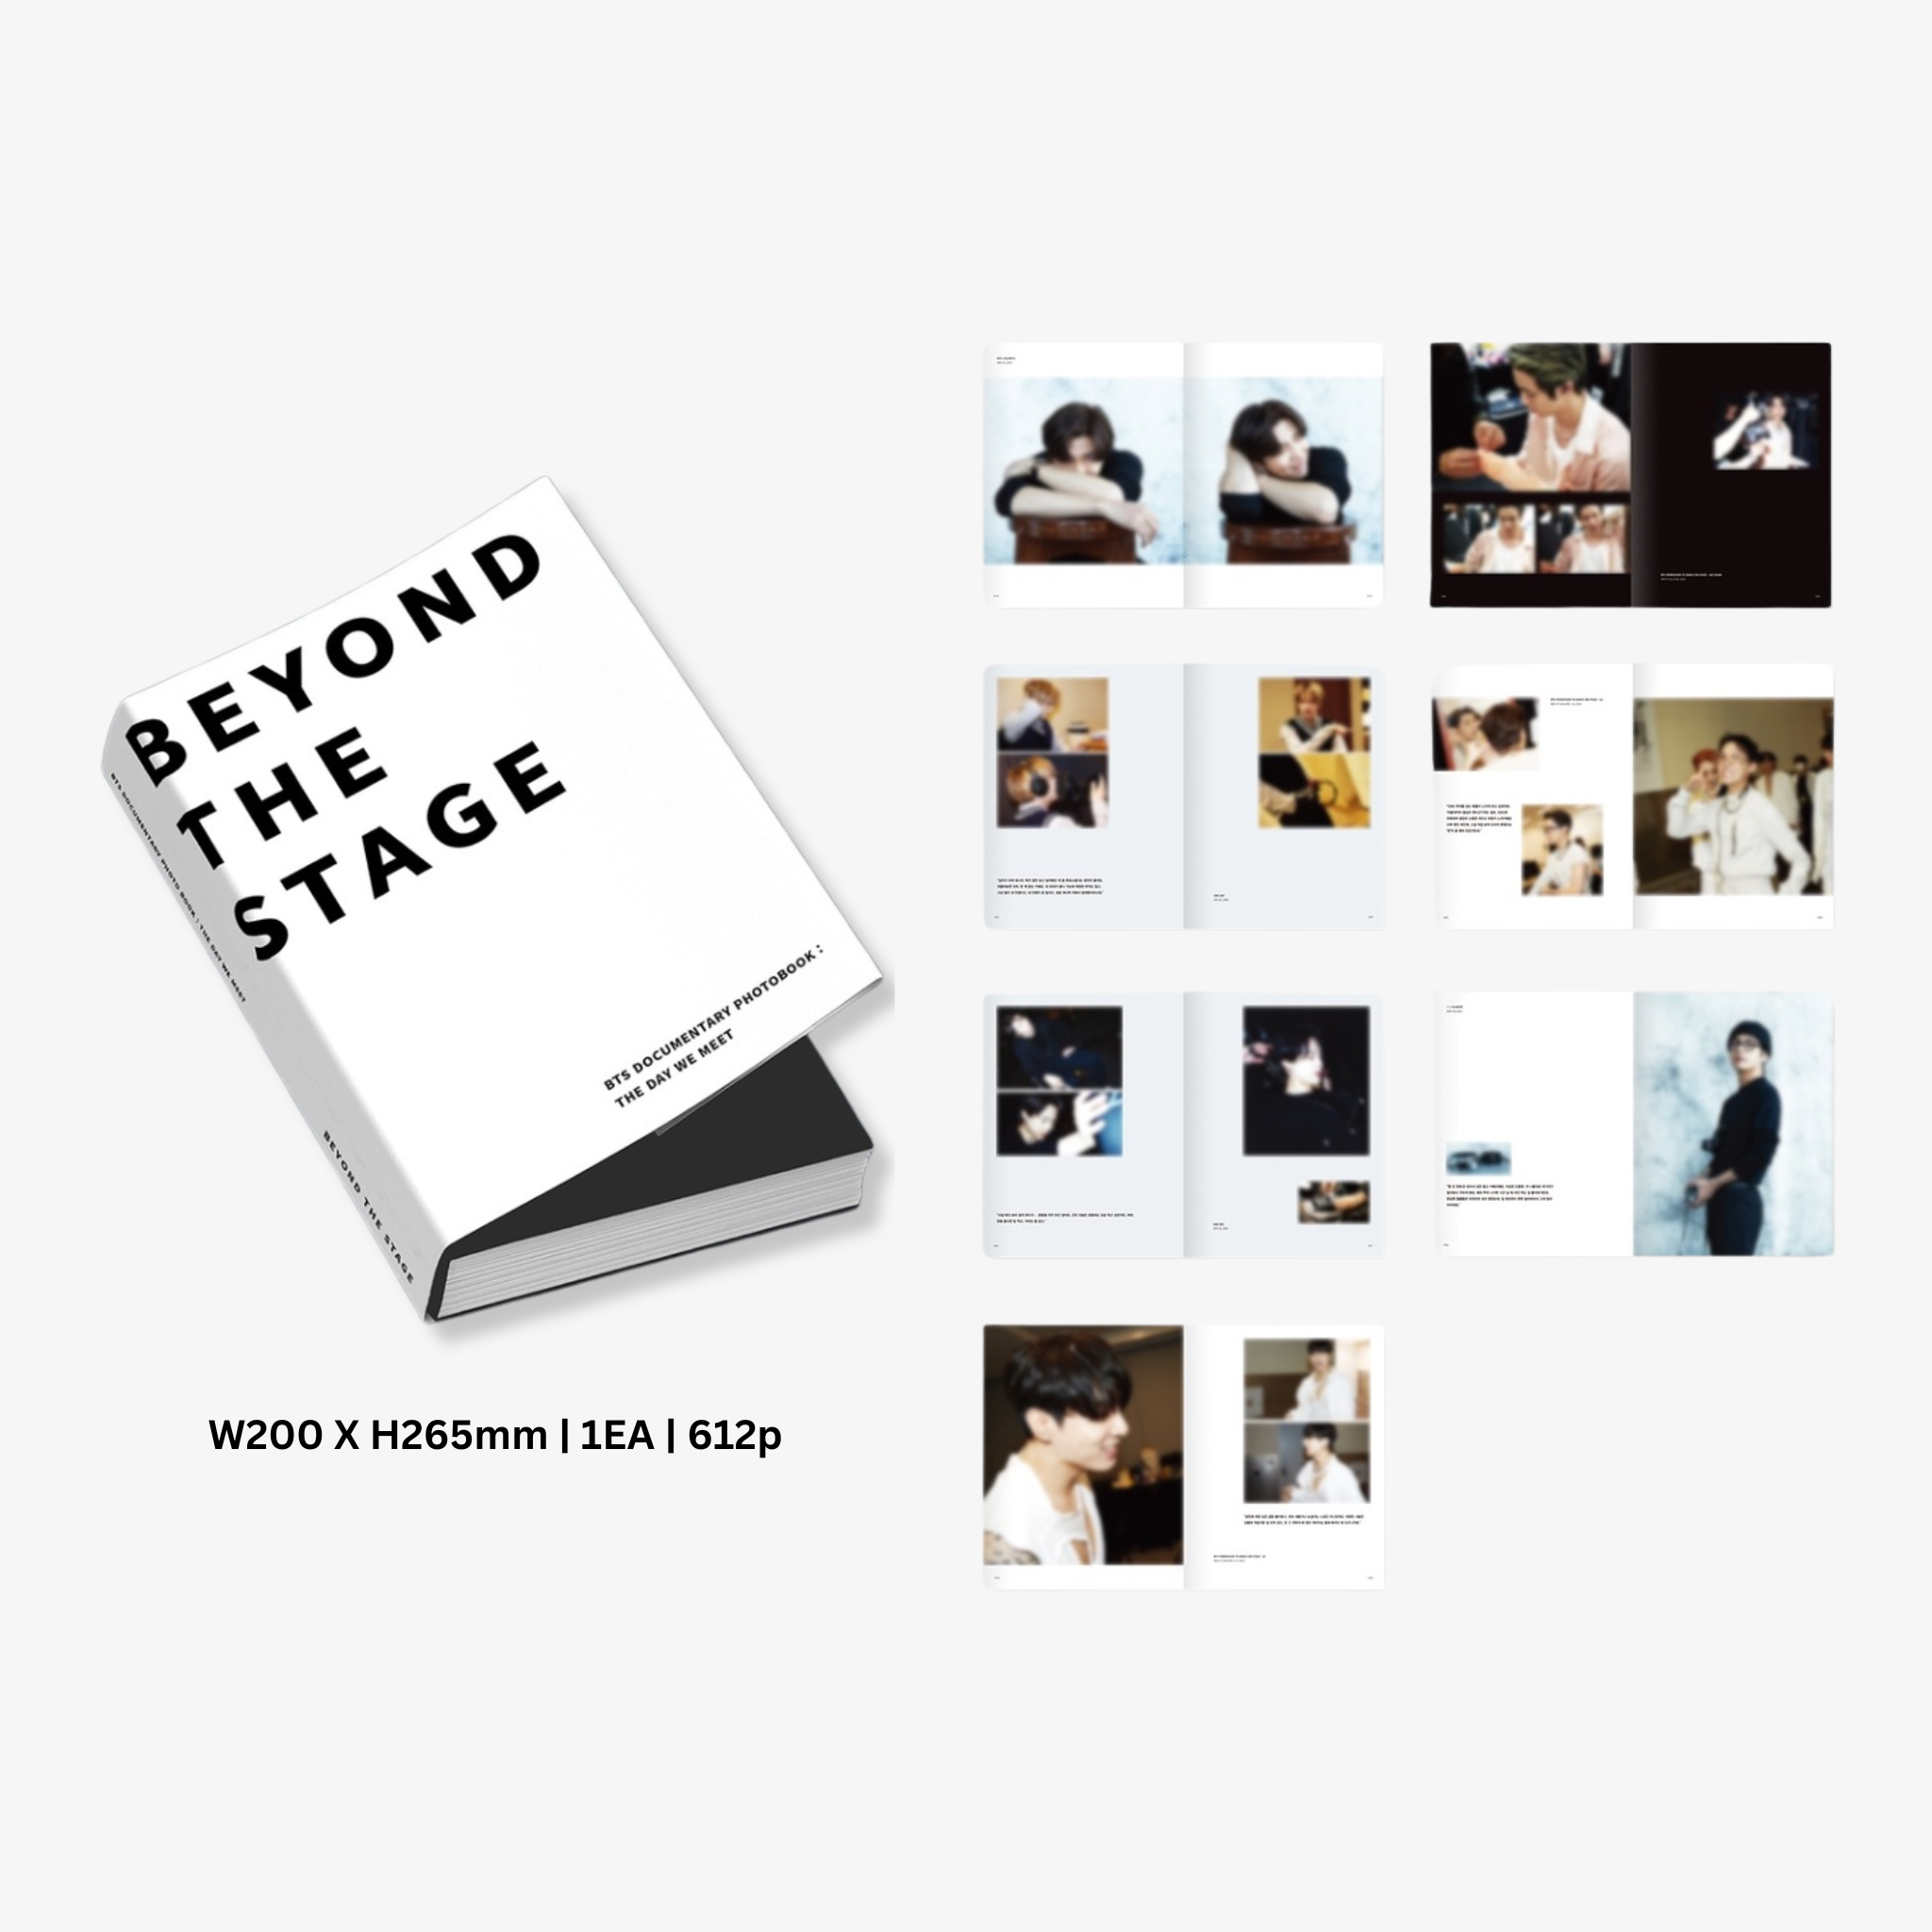 BTS "BEYOND THE STAGE" DOCUMENTARY PHOTOBOOK: THE DAY WE MEET